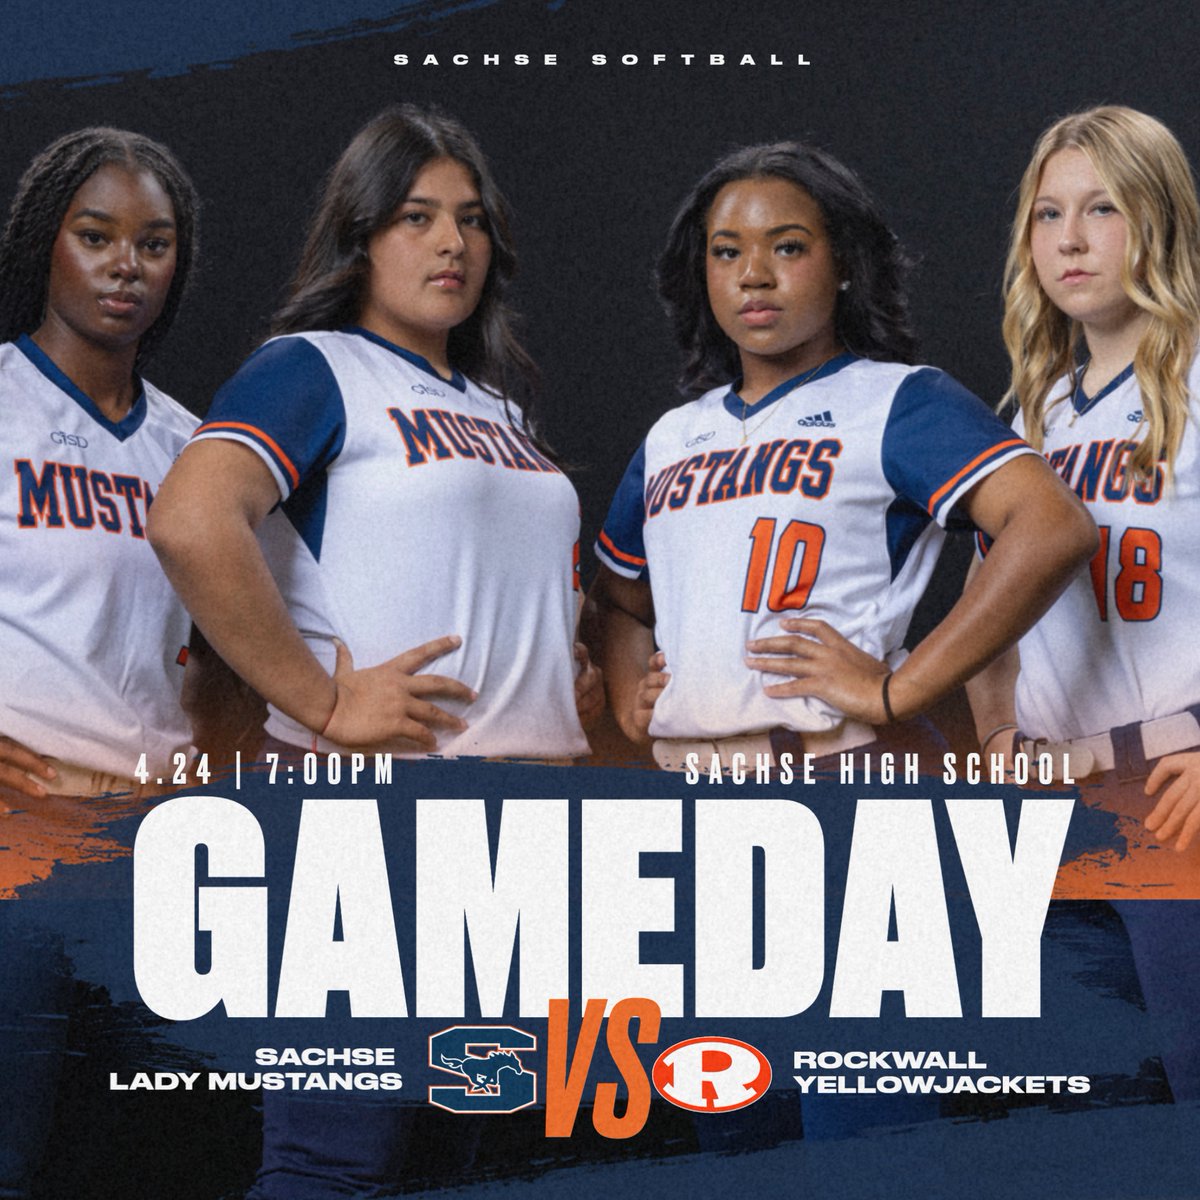 It's a playoff softball GAMEDAY 🚨 Game 1 is at OUR PLACE tonight, come out, wear NAVY and get ROWDY ❗️ 🗒️ UIL Bi-District 🆚 Rockwall (10-6A) 🕖 7:00 PM 📍 Sachse, TX #LadyStangSB x #TNT